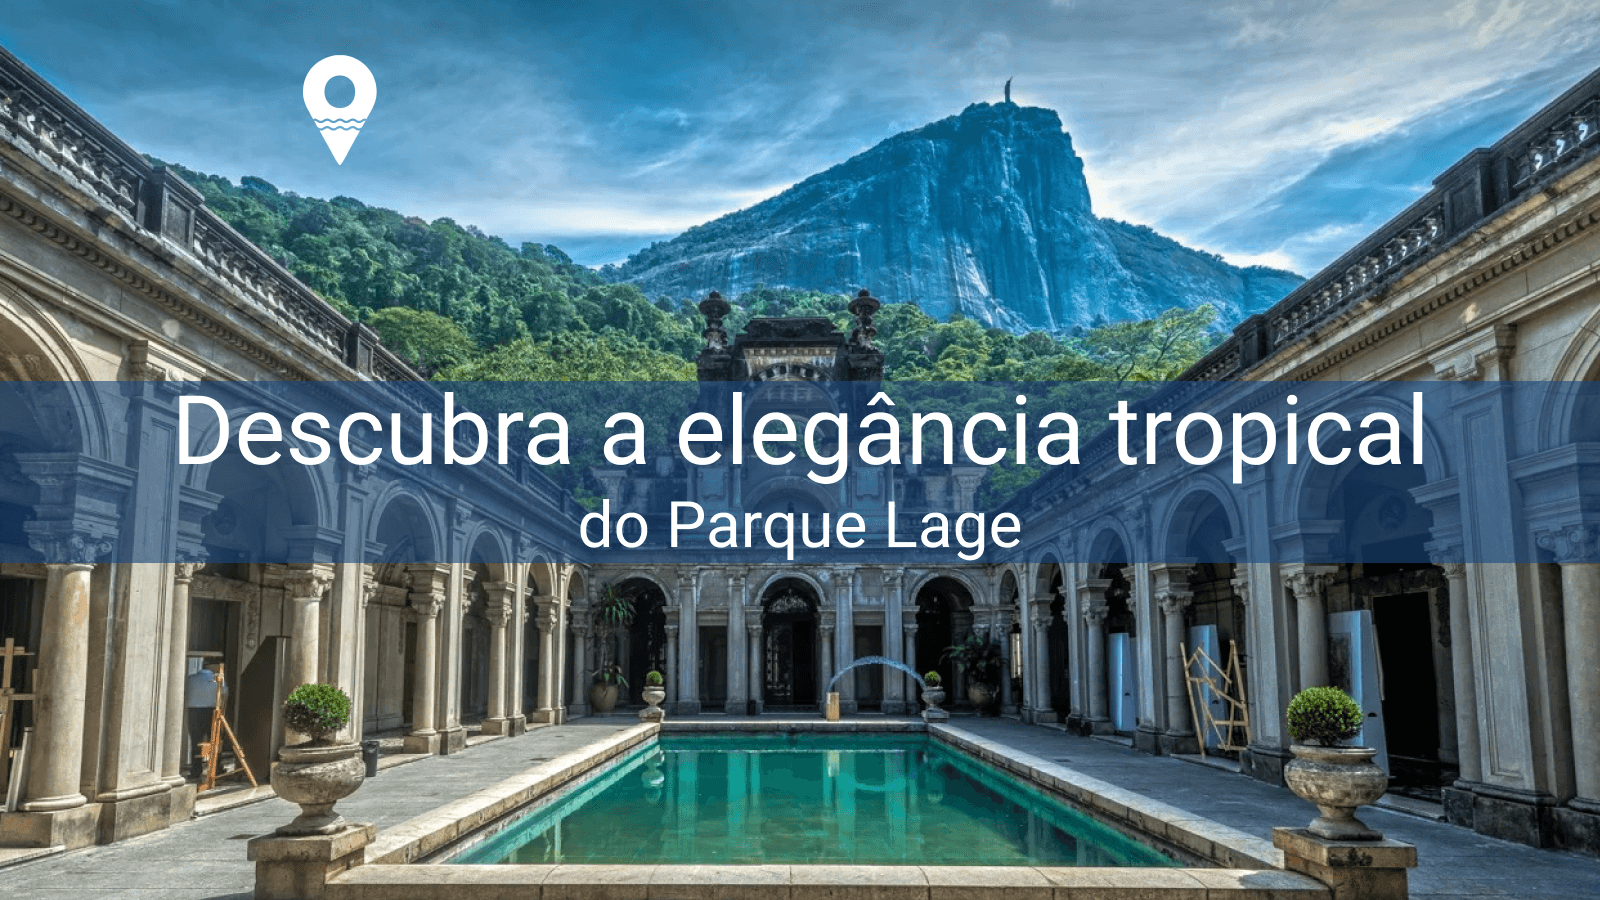 Everything you need to know about Parque Lage!